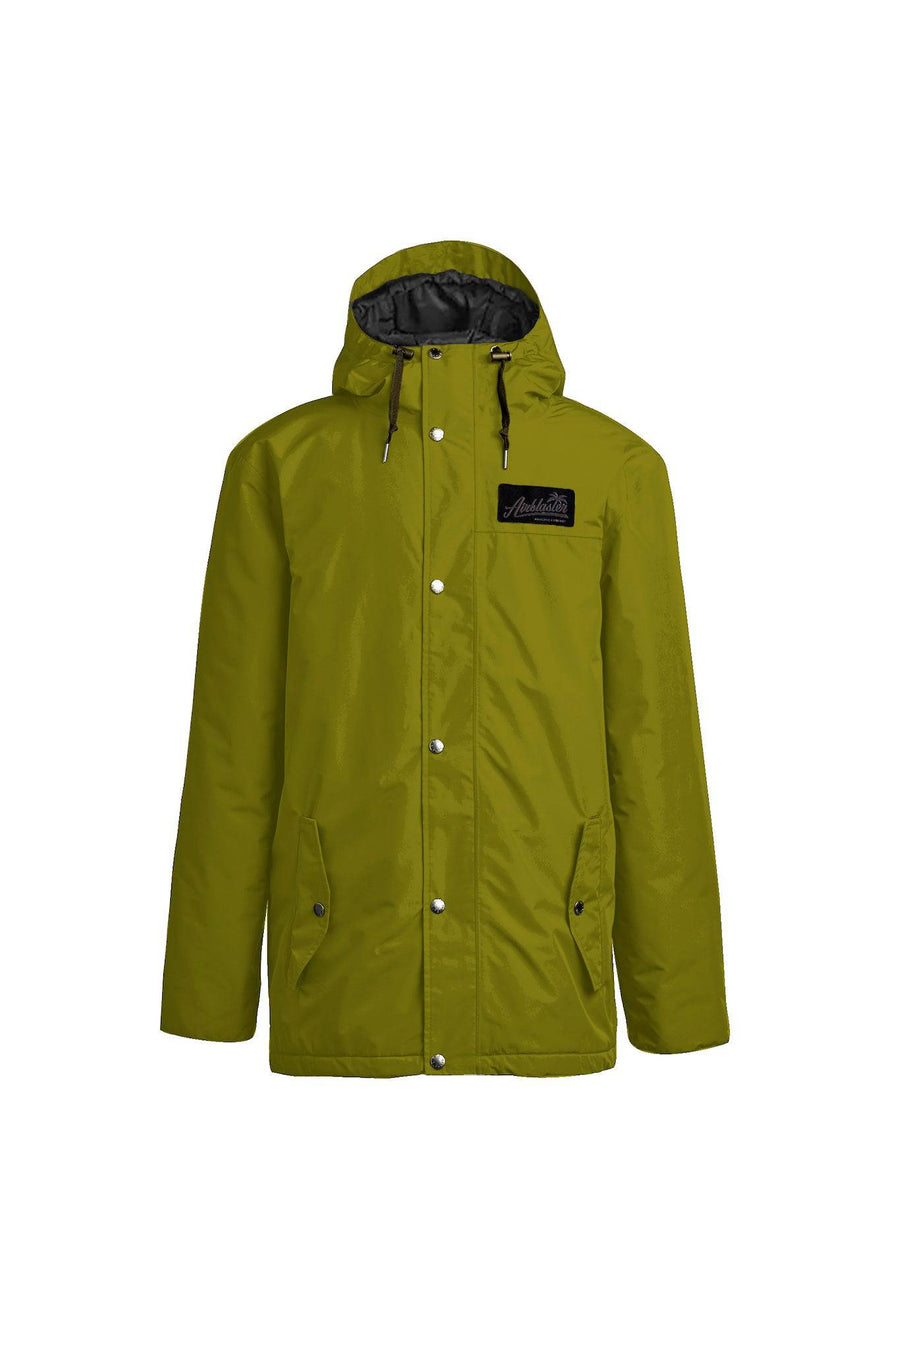 Airblaster Heritage Parka in Moss 2023